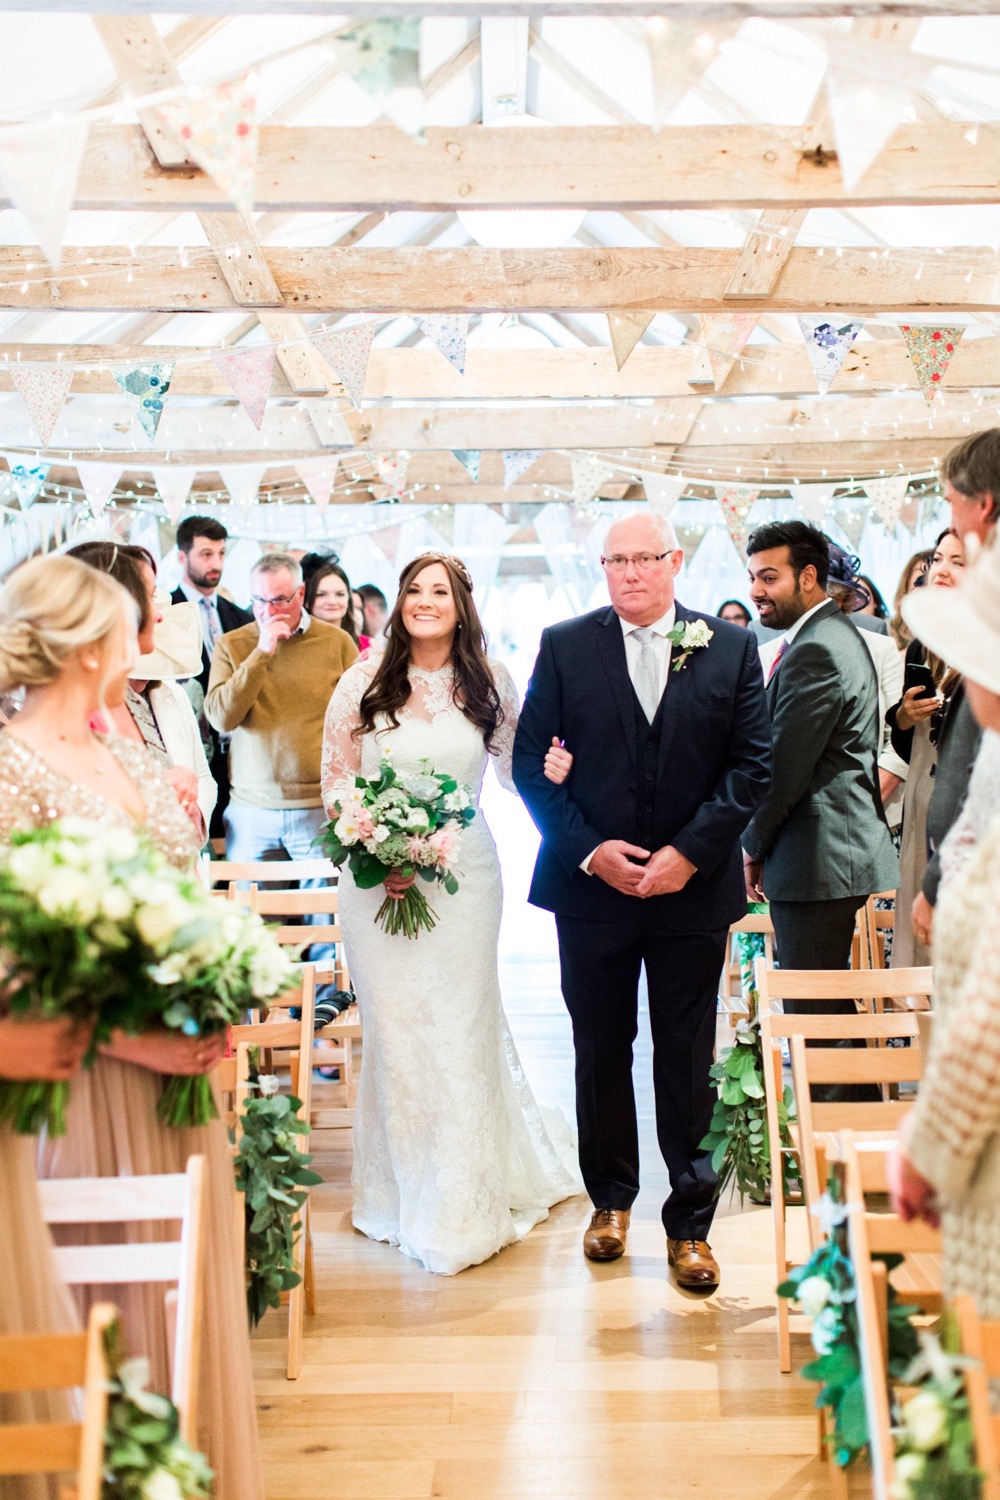 The bride and her father walk down the isle. The bride is on the left. She wears a fitted white gown with lace details and a veil. the pic is takes from the front of the wedding  barn and you can see bunting on the beams. The FOB wears a dark suit with a white shirt and a bow-tie. The bride holds a bouquet of white and pink flowers and it is hand-tied. There is a bridesmaid in the foreground to the left who holds a similar bouquet. The guests are standing bedside their chairs looking at the bride and FOG. Wooden folded chairs are set out in two columns of rows with an aisle down the middle.